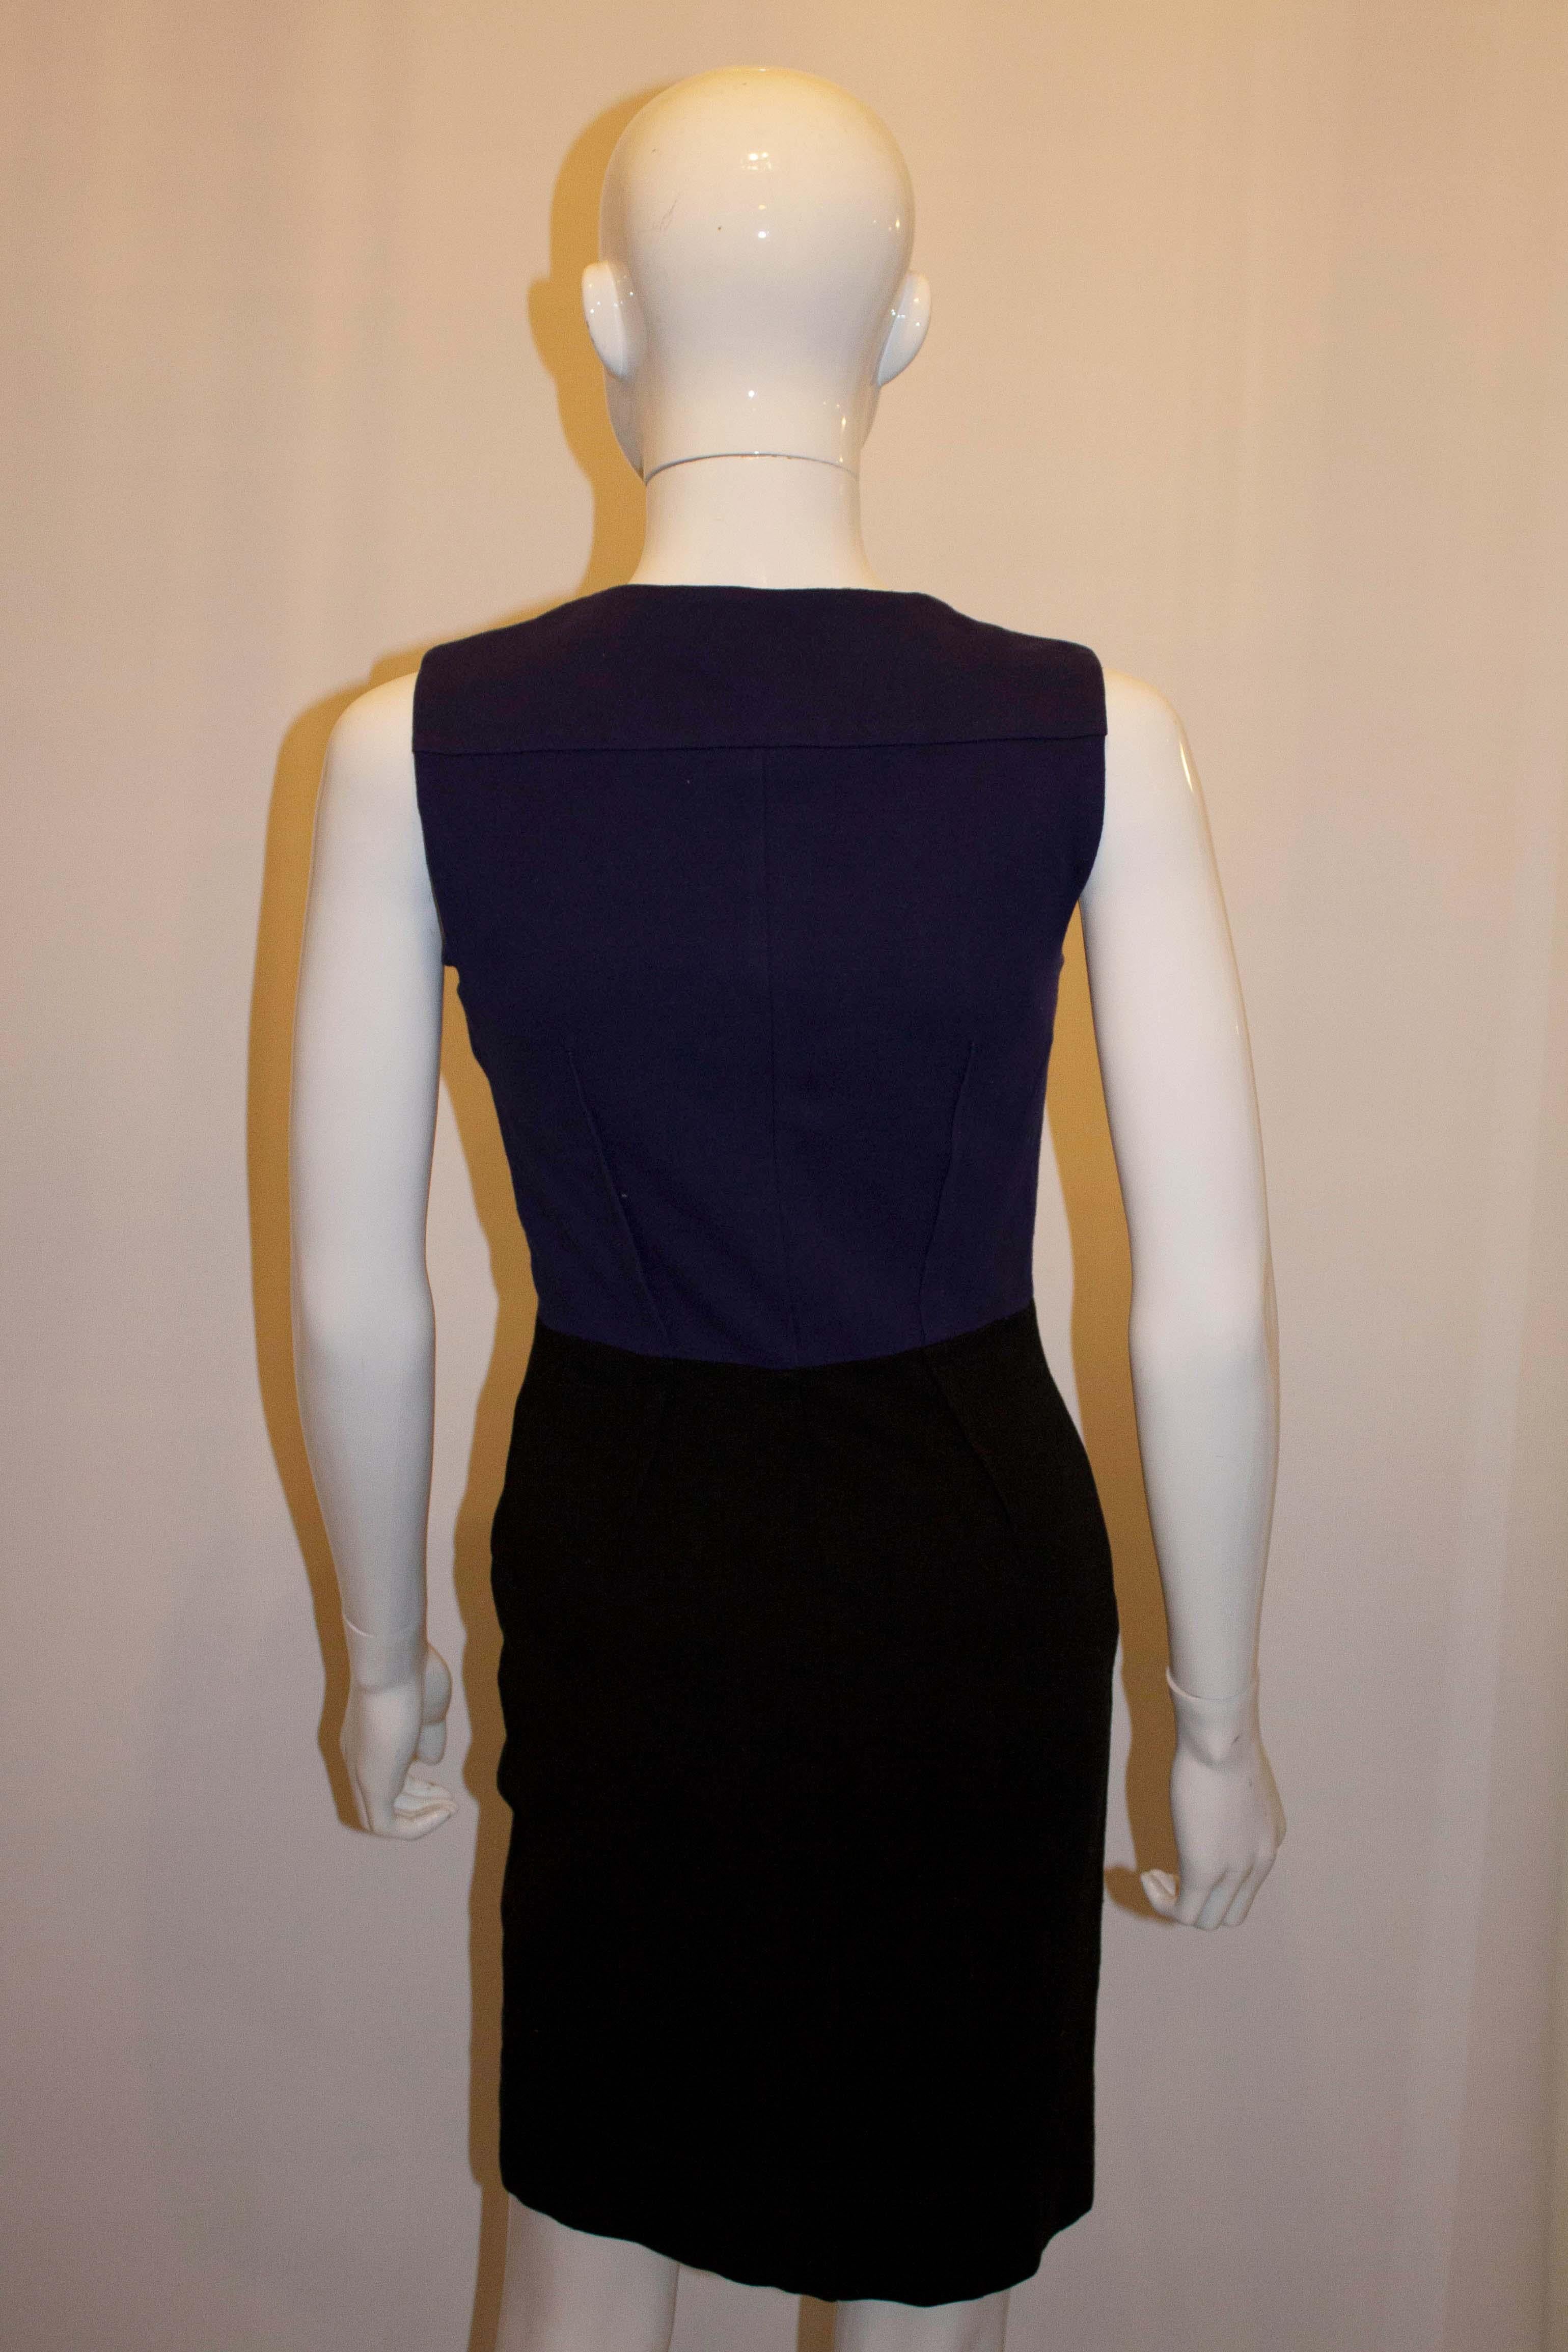 A chic and easy to wear dress by Diane von Furstenberg. The dress has wonderful tailoring, and is in a blue and black colour match with two zips, one going up the other down.
Size 2 , Measurements bust 32'',length 36''